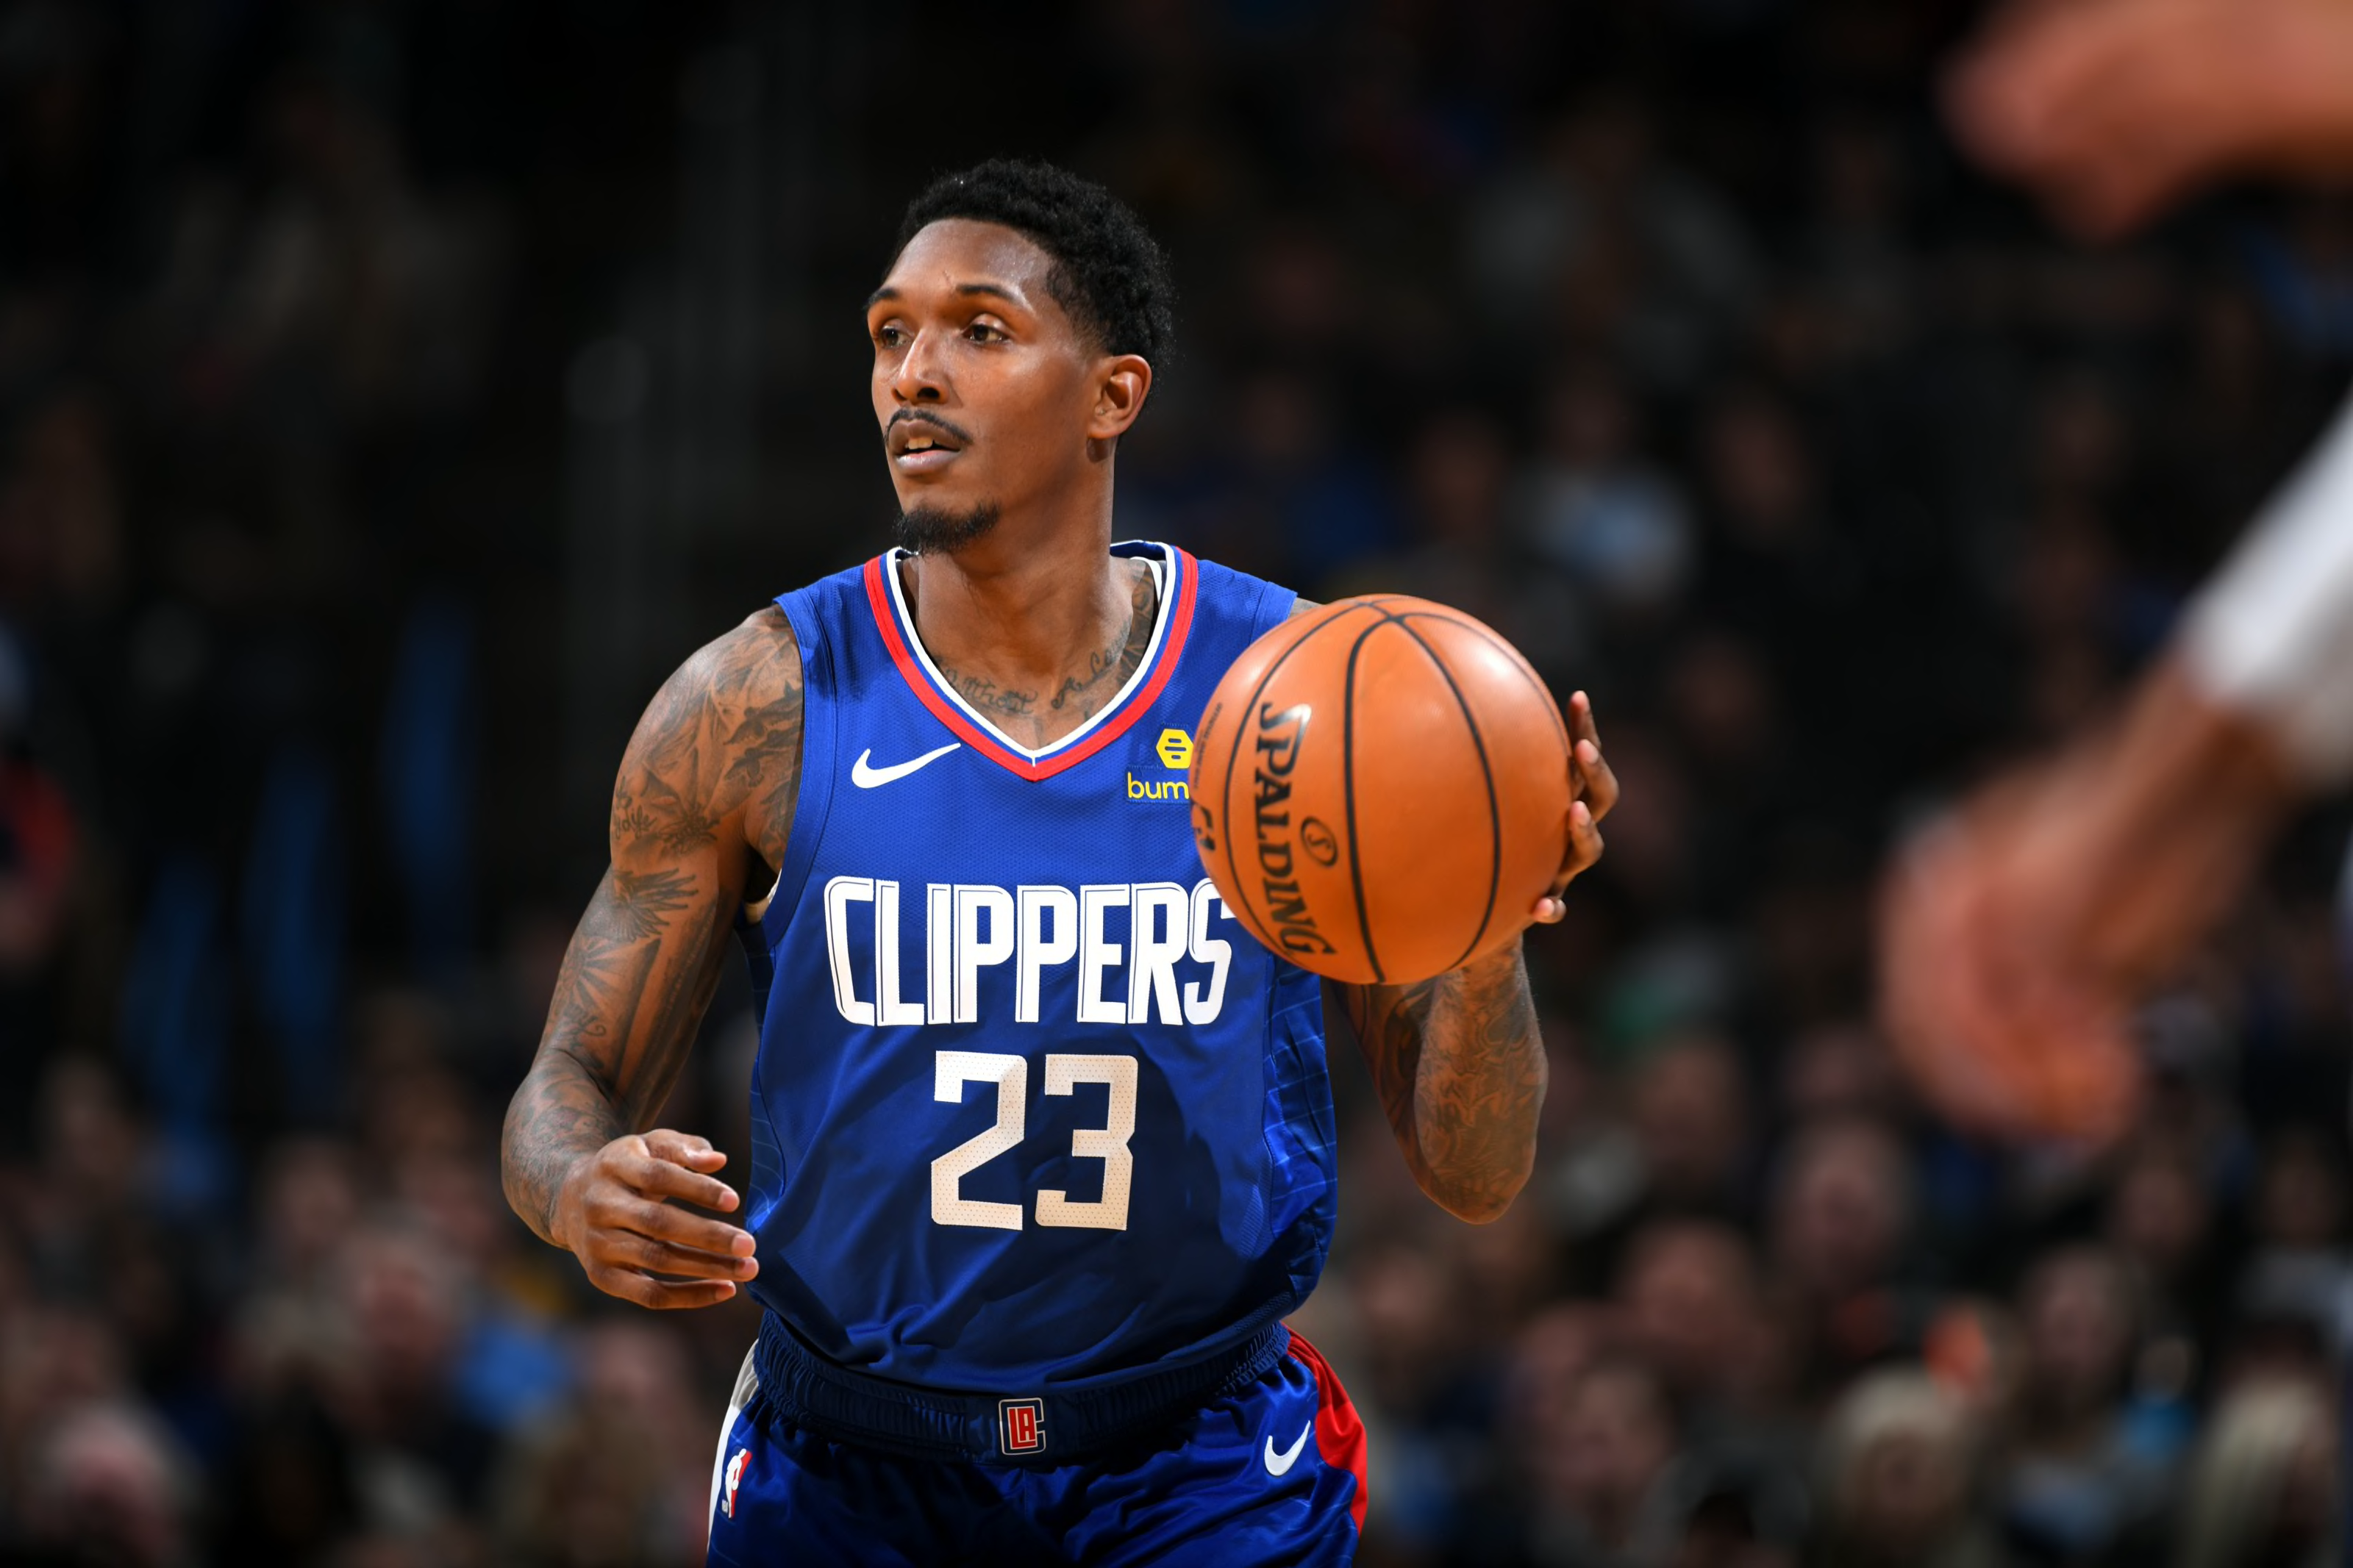 lou williams jersey numbers